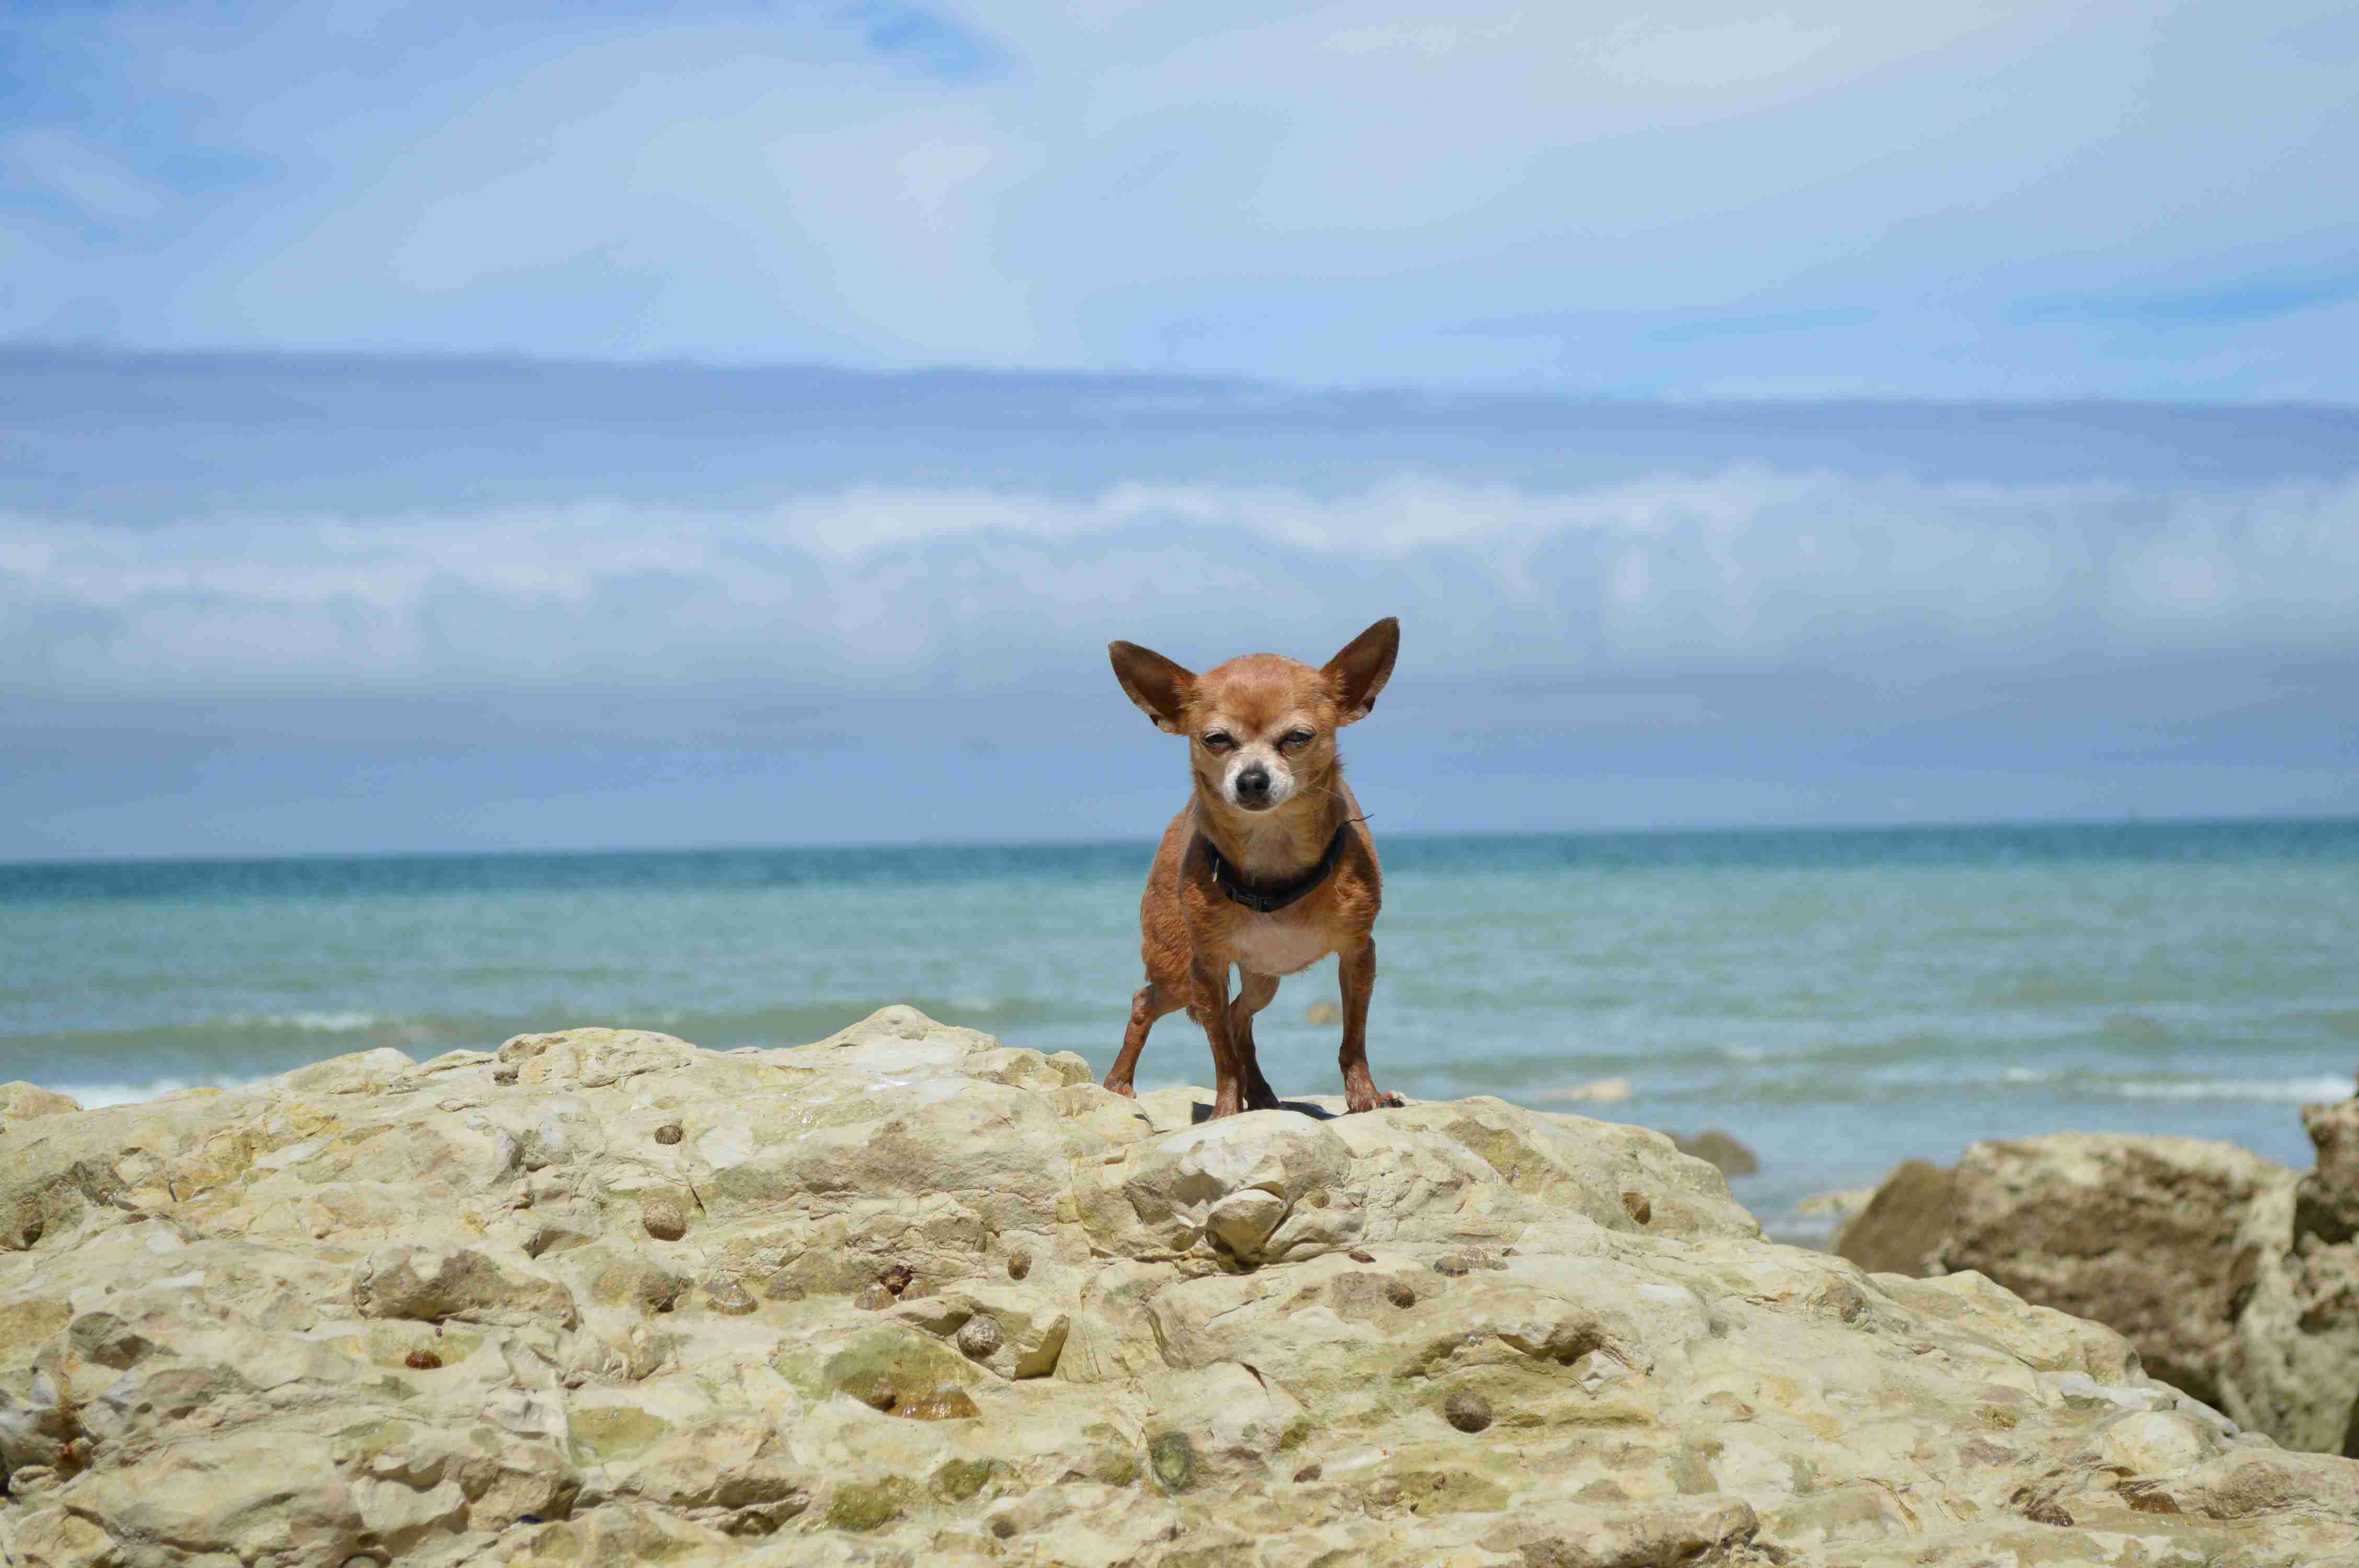 How can I make sure my Chihuahua is getting enough mental and physical stimulation?